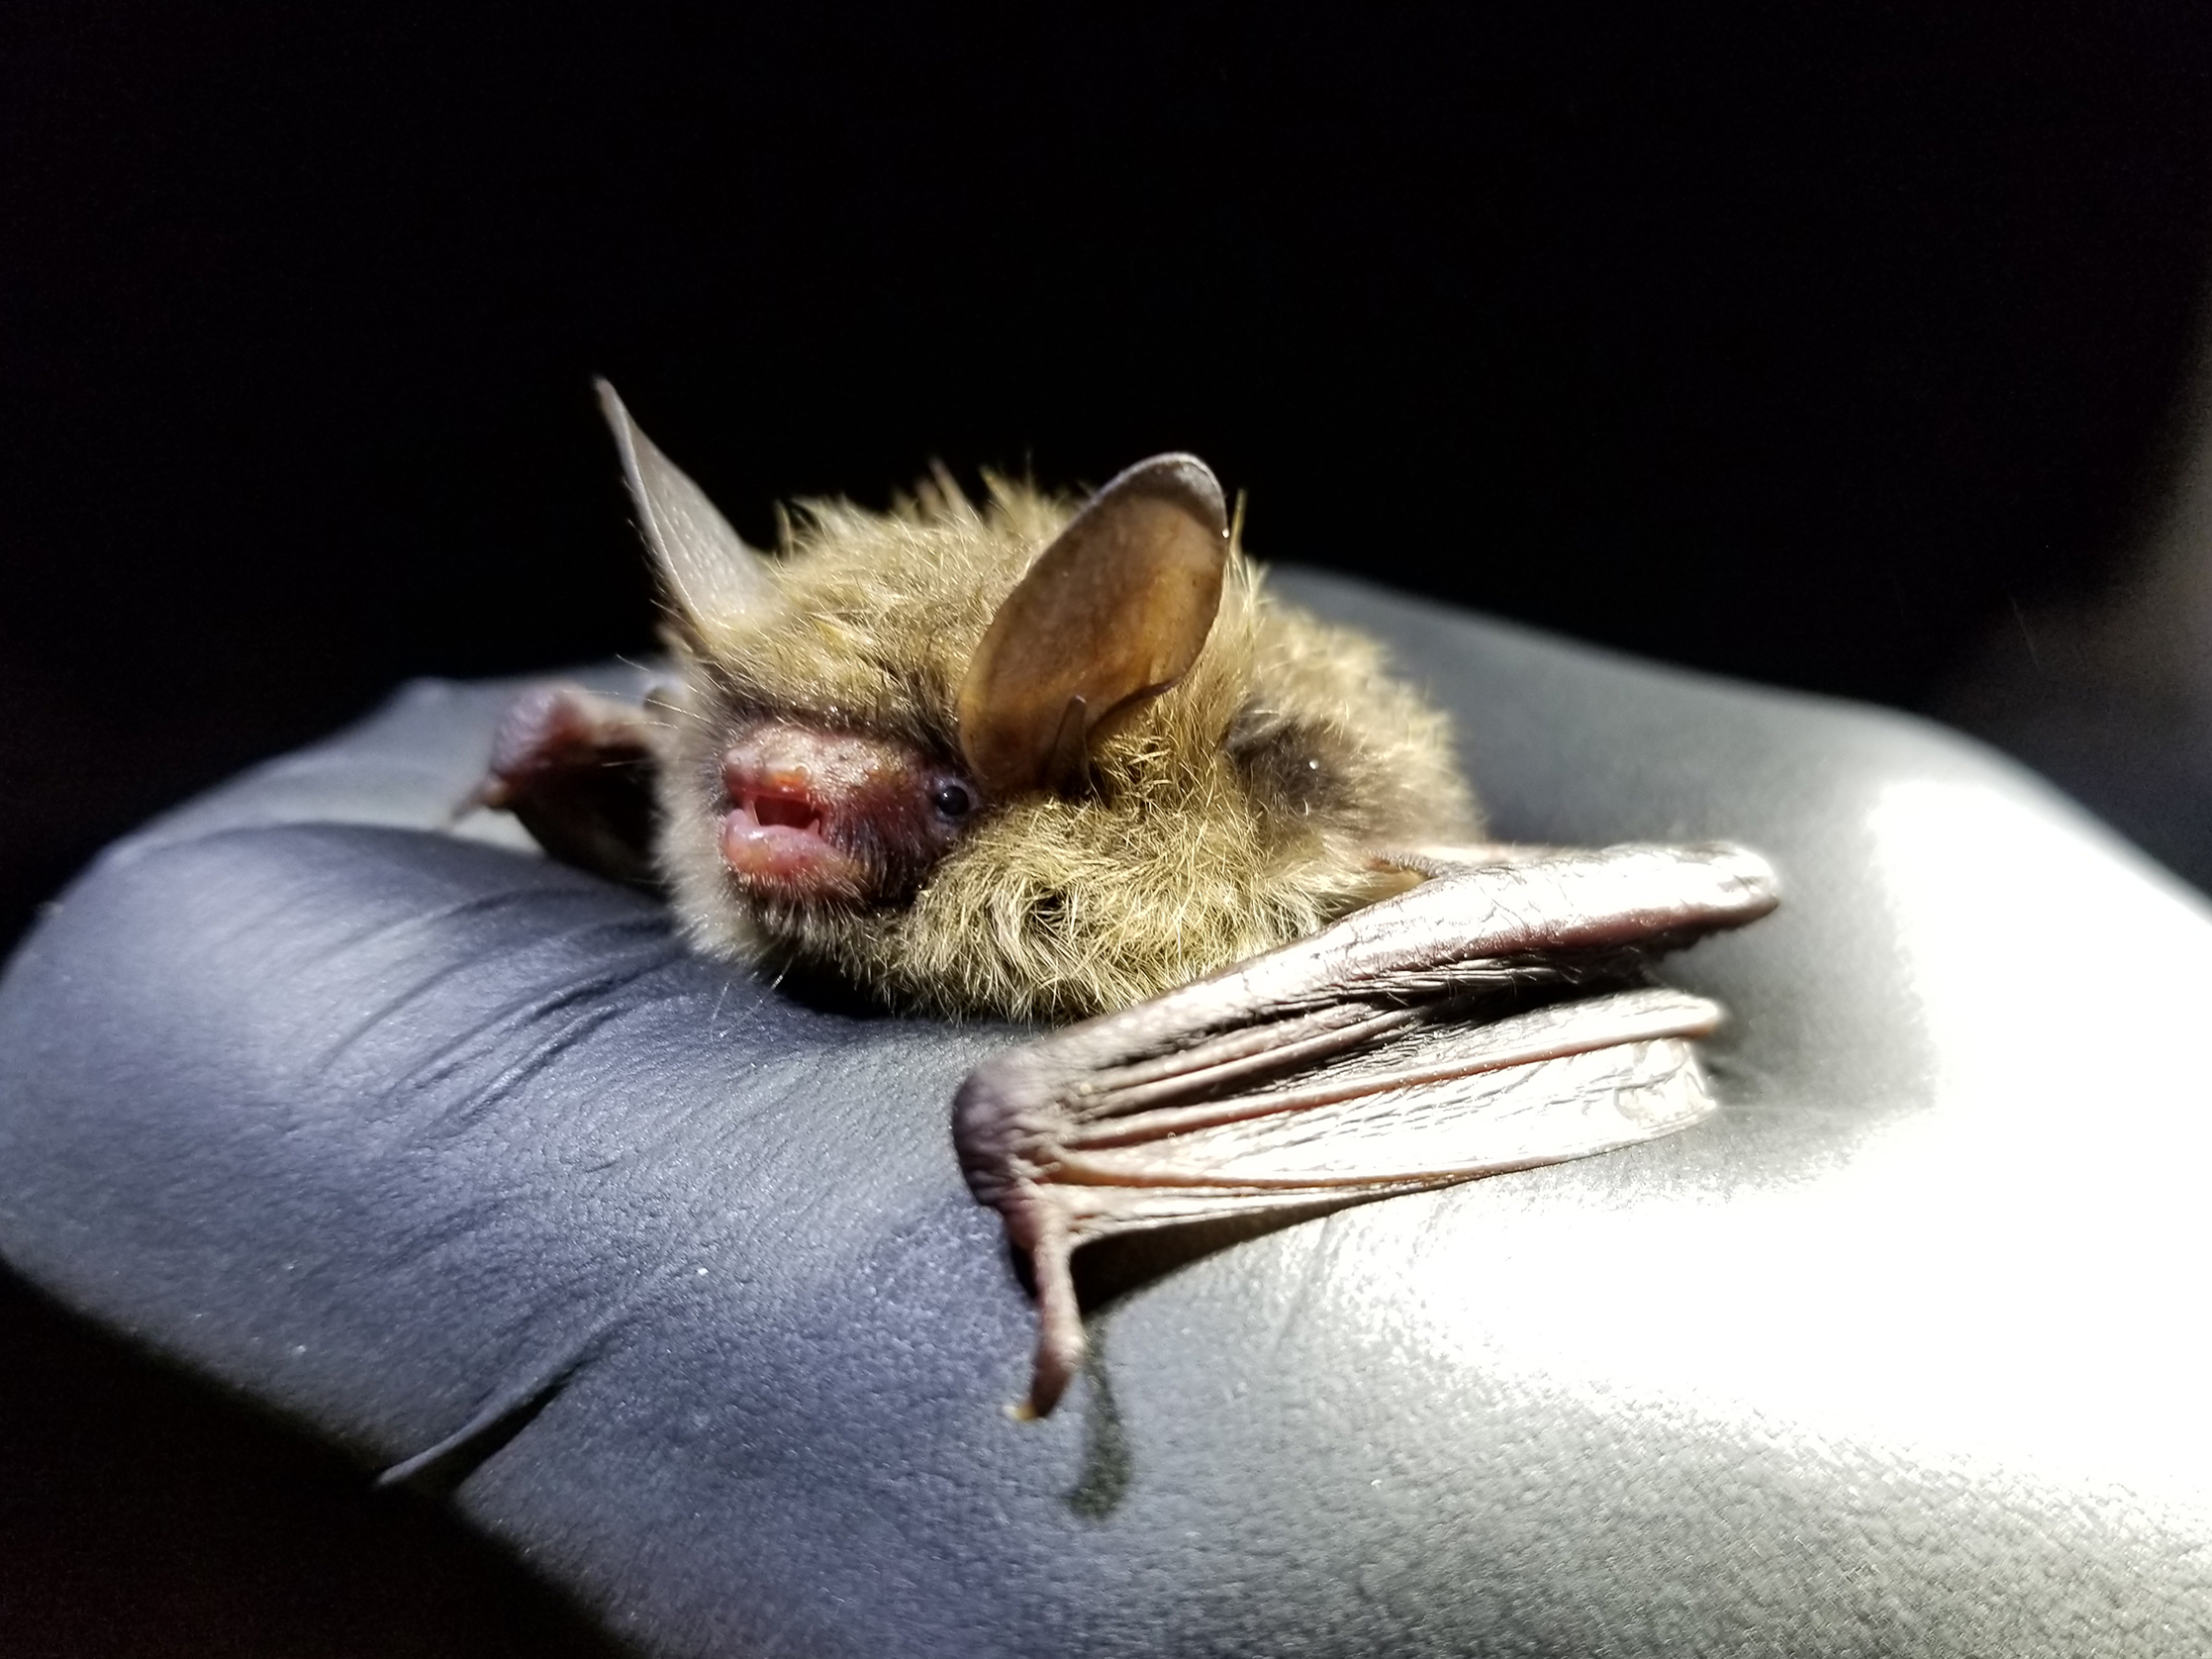 A bat faces extinction due to a deadly disease. Agencies and researchers hope to change that.